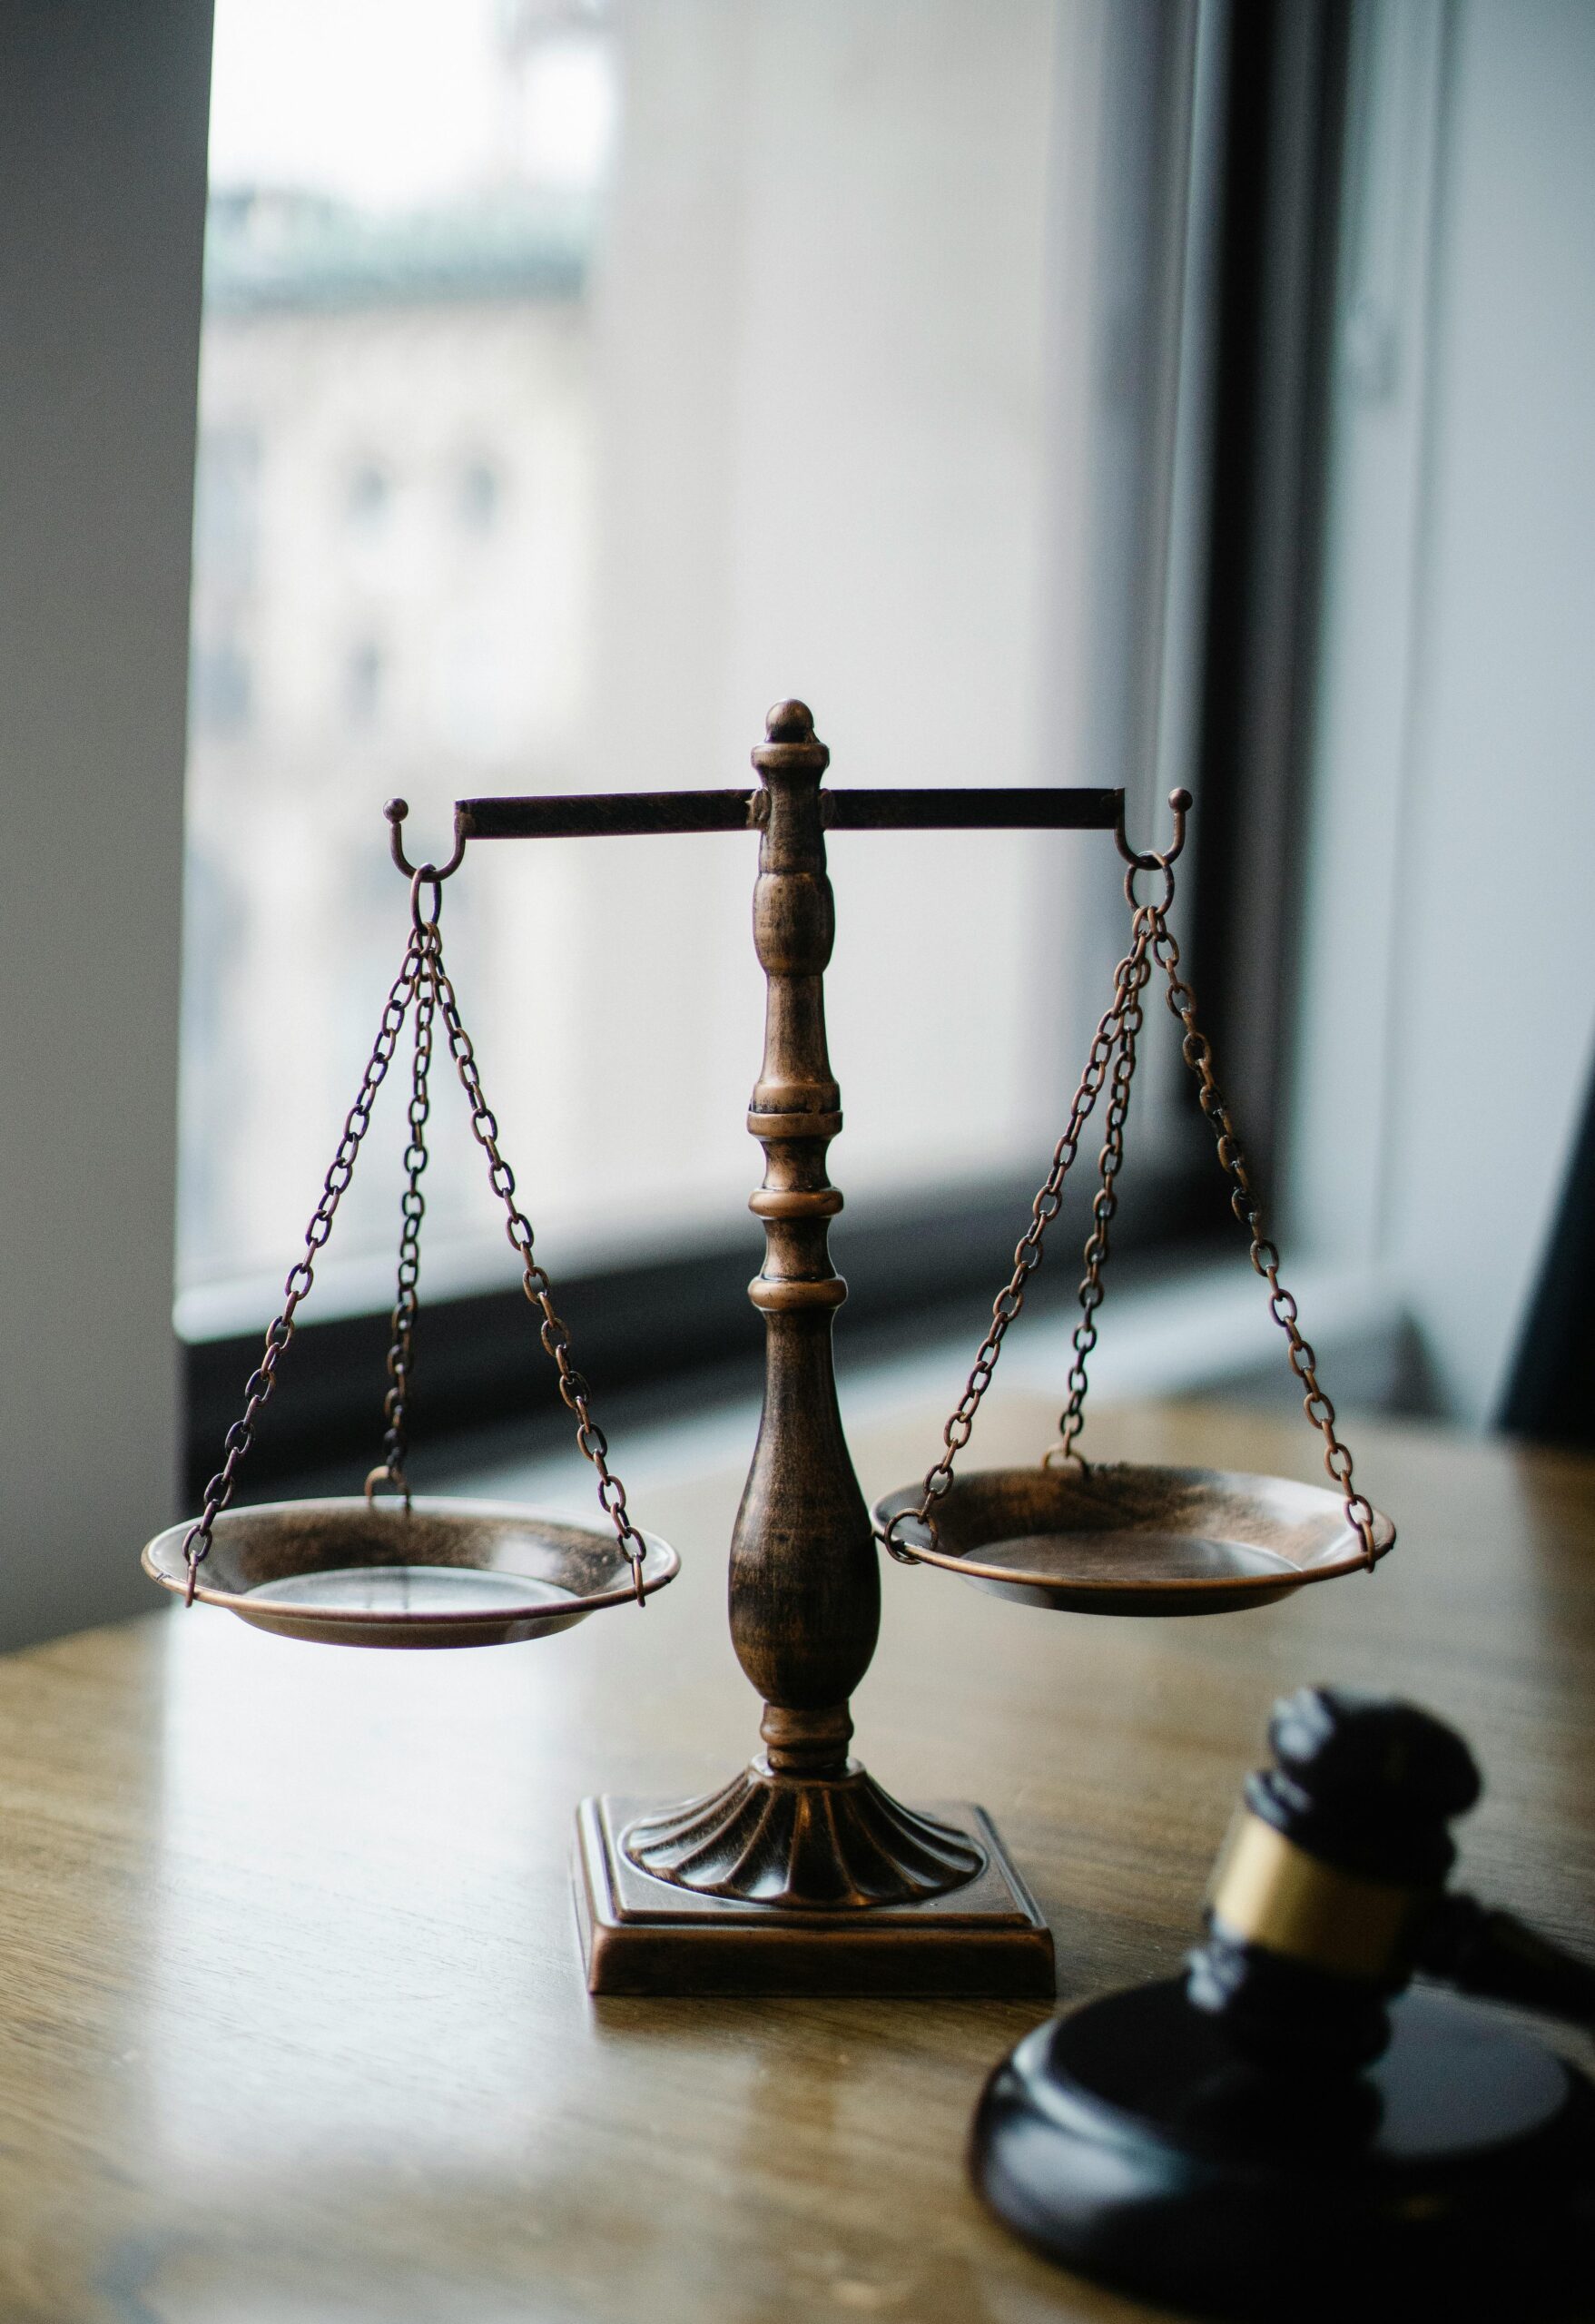 Scales of justice and gavel